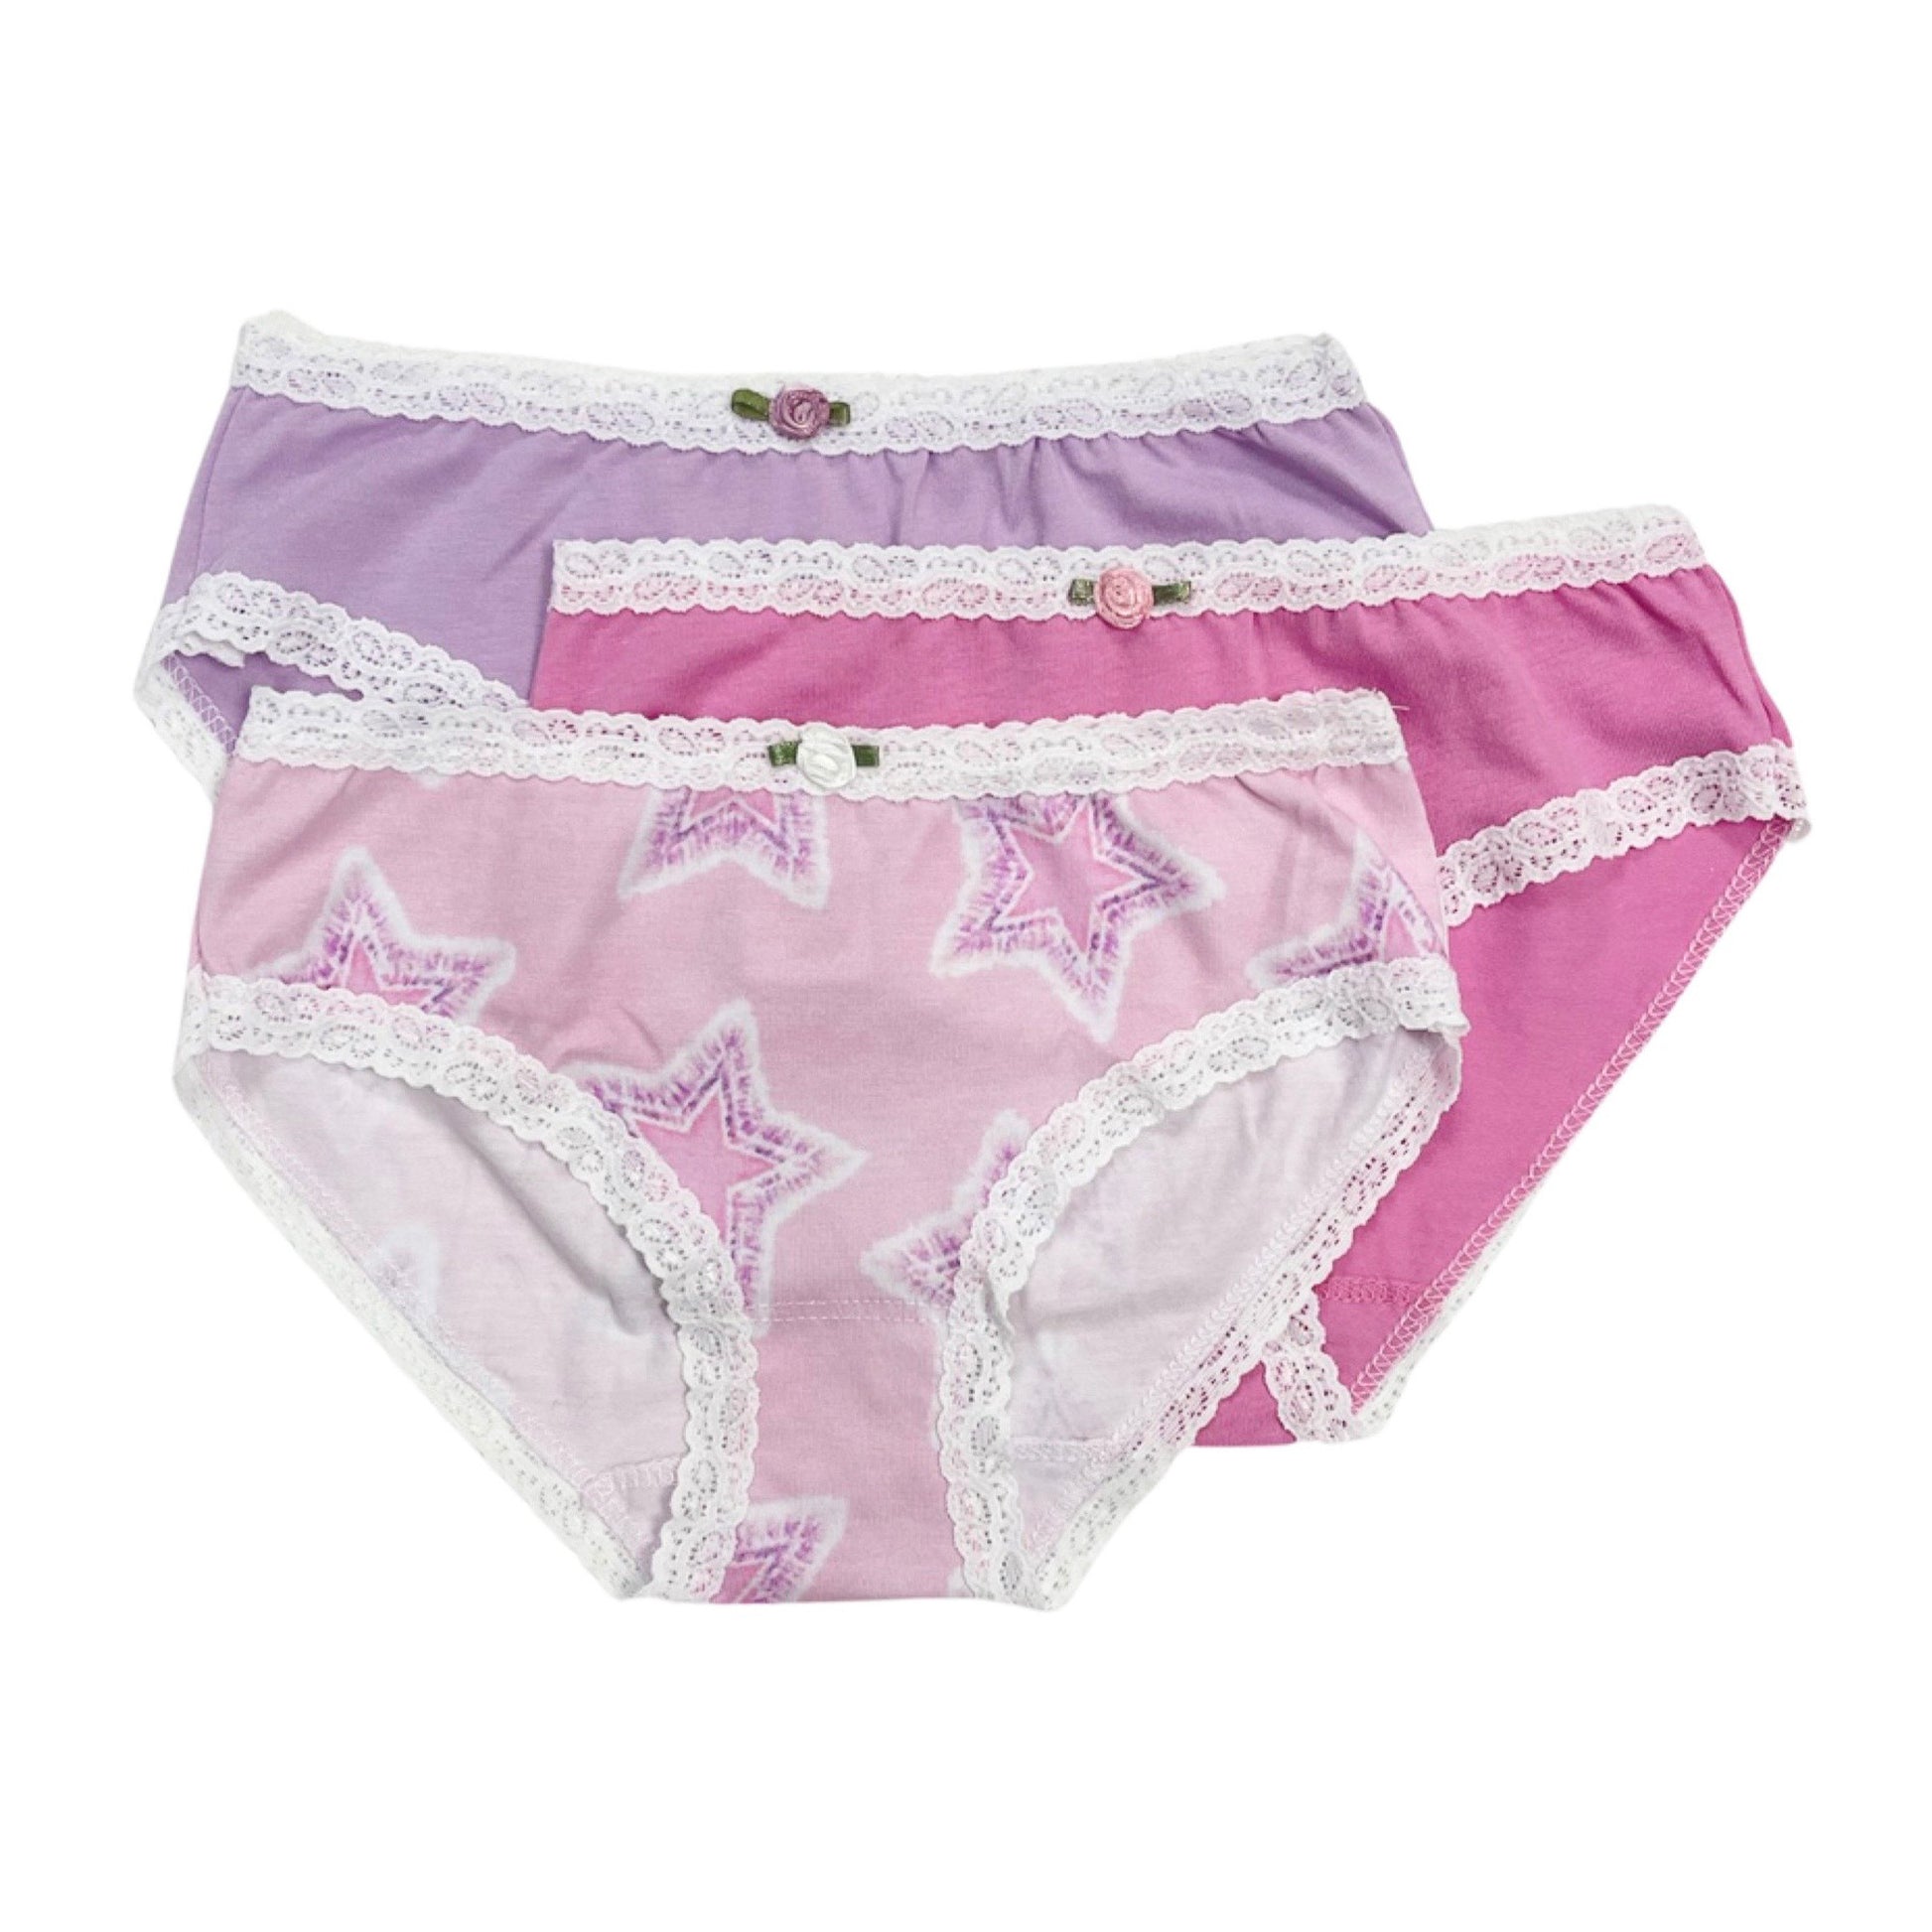  Esme JU60 Junior Teen Panty Underwear Size Junior Small 16 7Day  Rainbow (7PCs): Clothing, Shoes & Jewelry